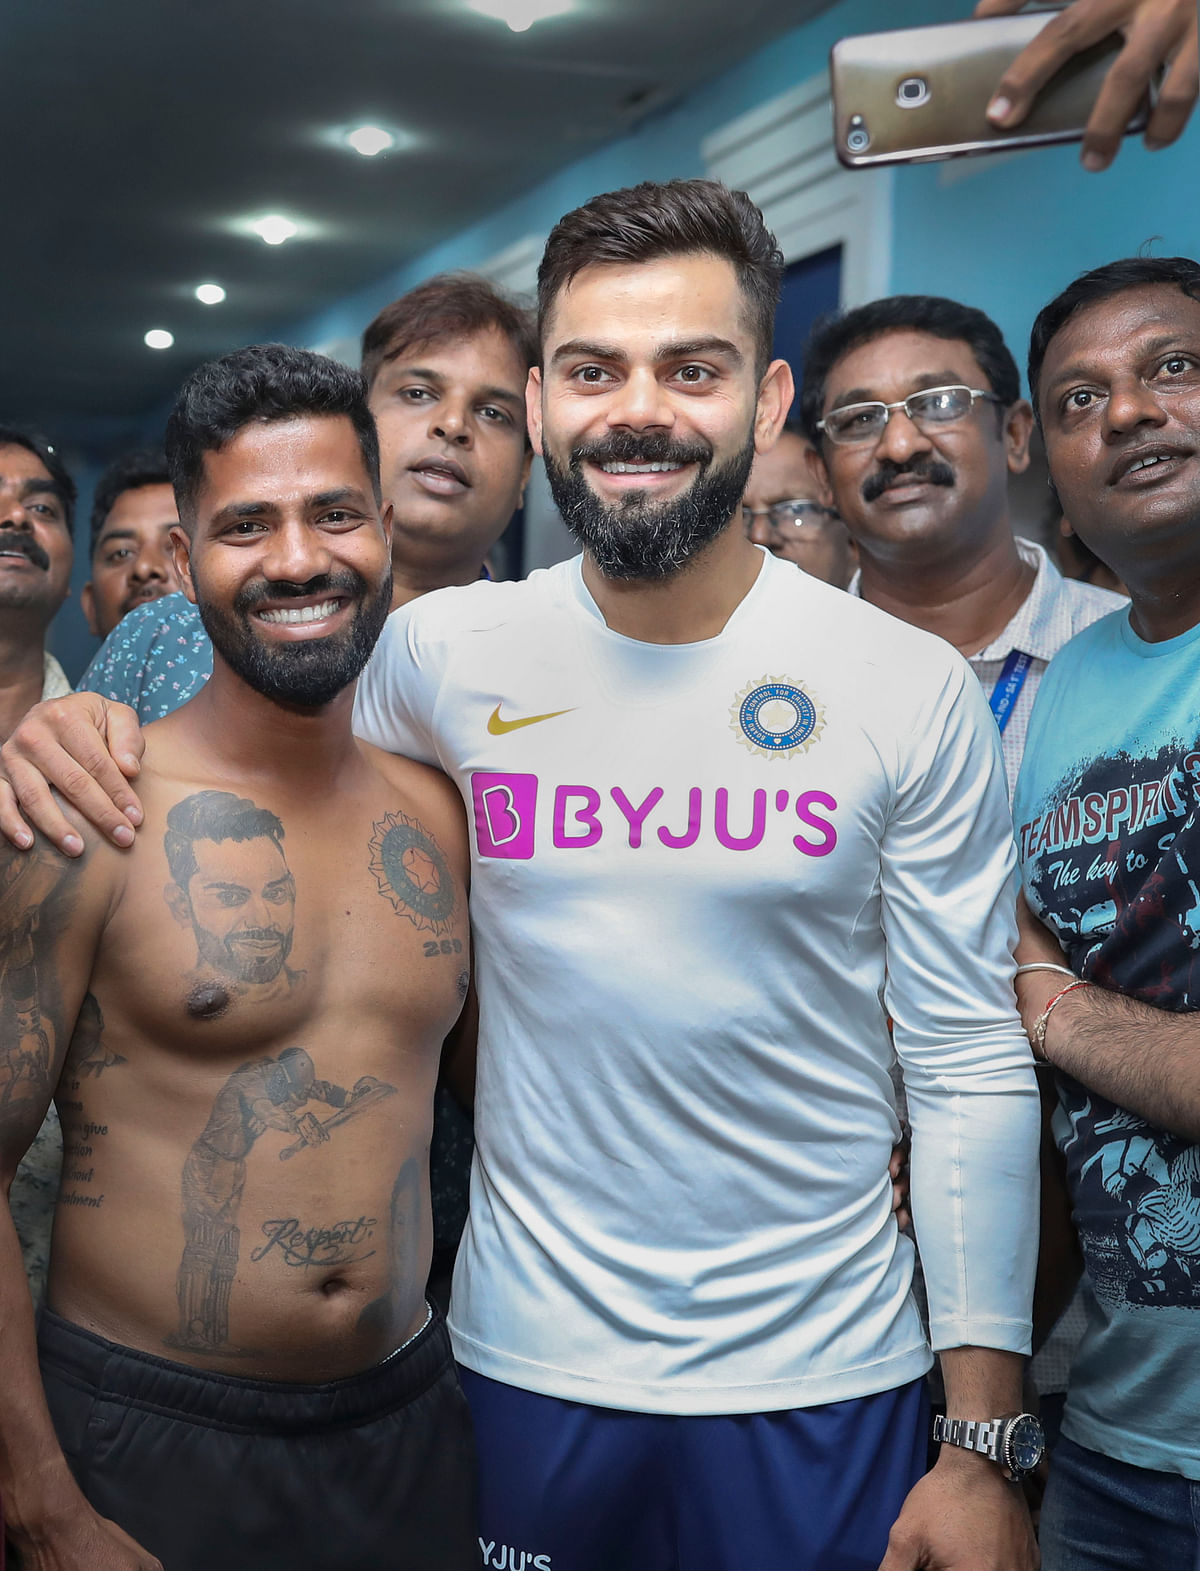 The said fan was seen sporting a tattoo of Virat’s face on his chest.